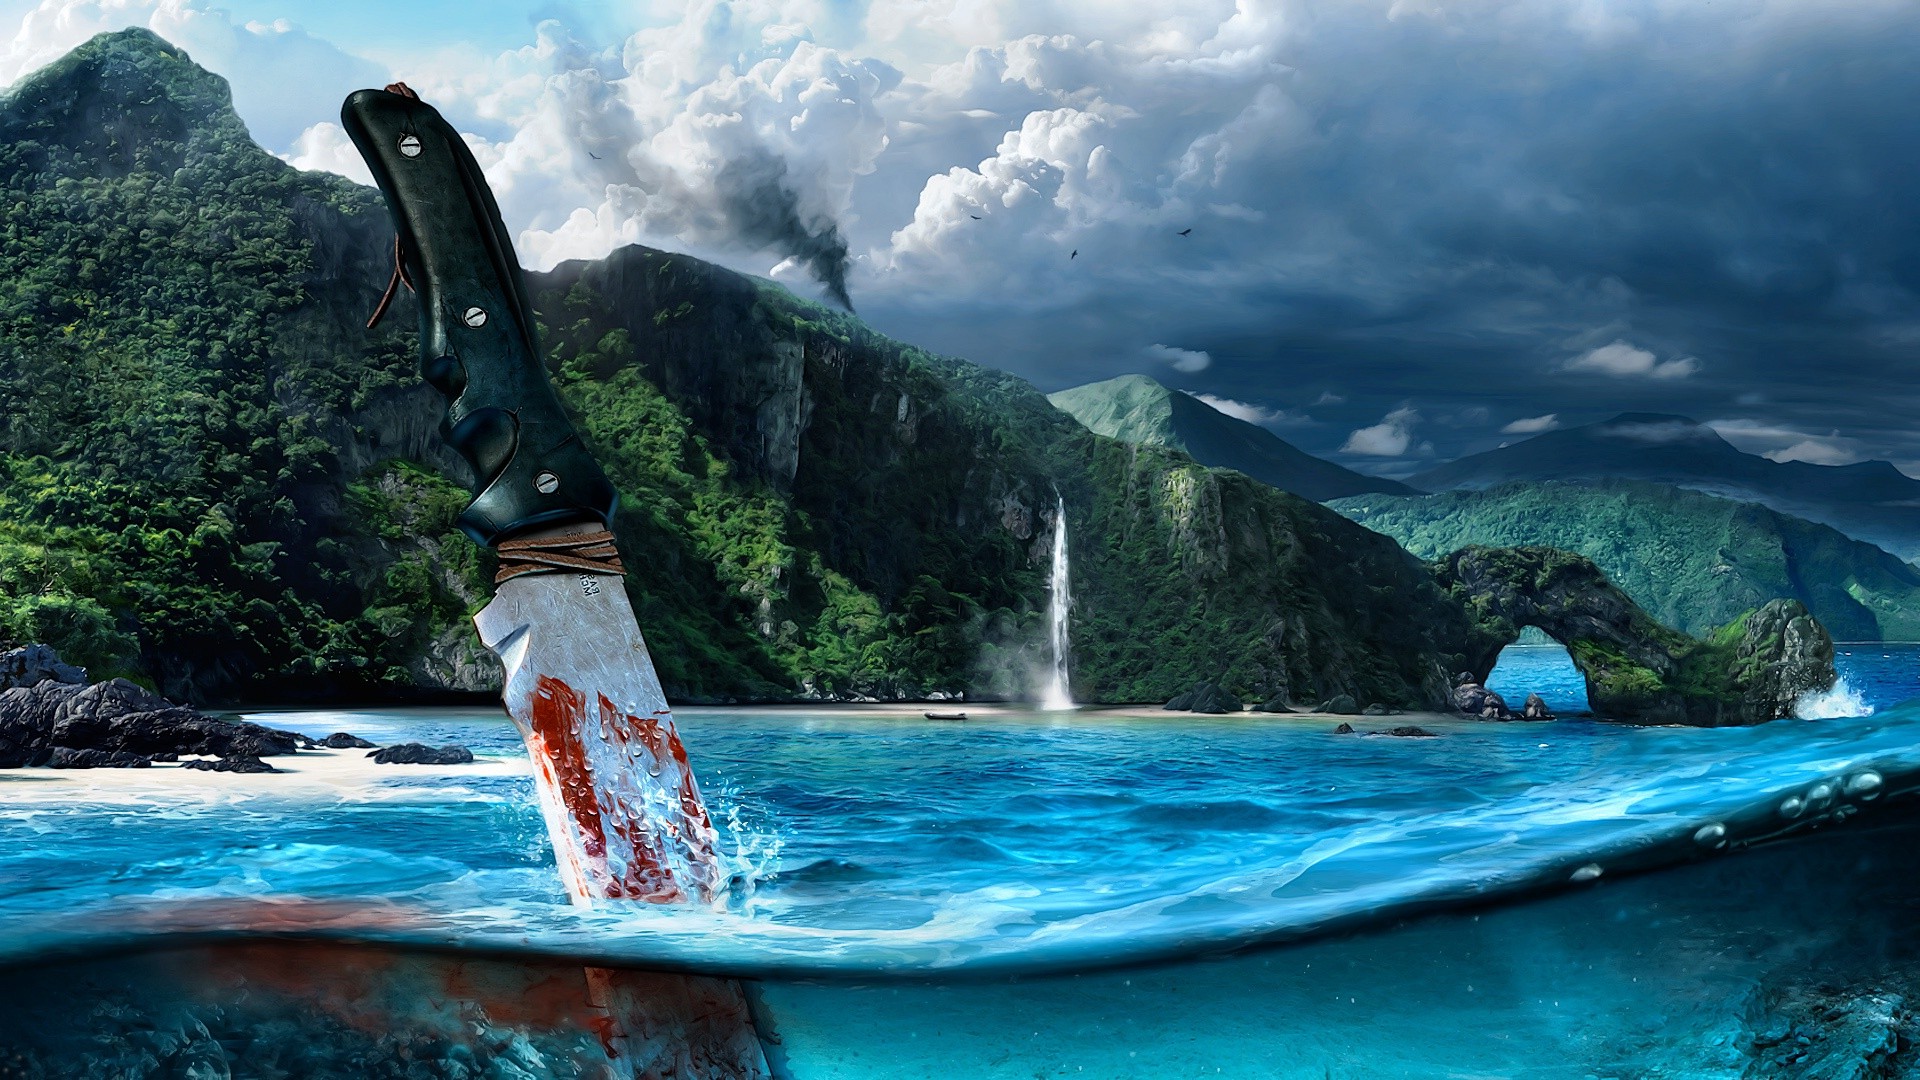 knife, Ubisoft, Tropical, Video Games, Far Cry 3, Split View, Far Cry Wallpaper